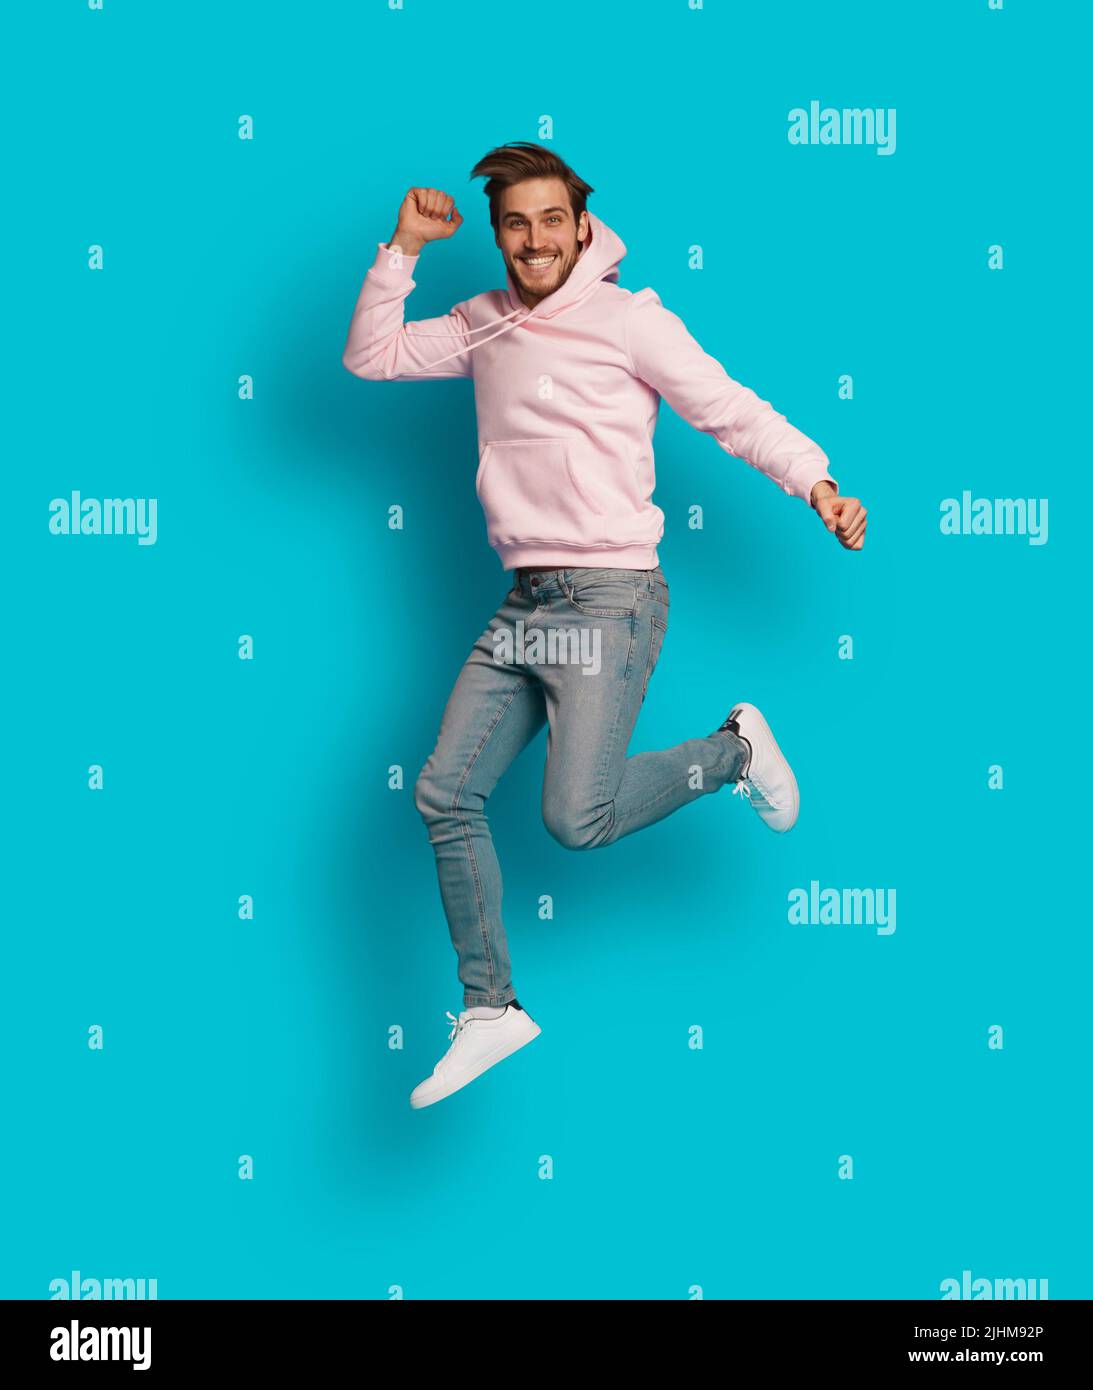 Full size photo of young happy excited smiling positive man jumping isolated on light blue color background Stock Photo